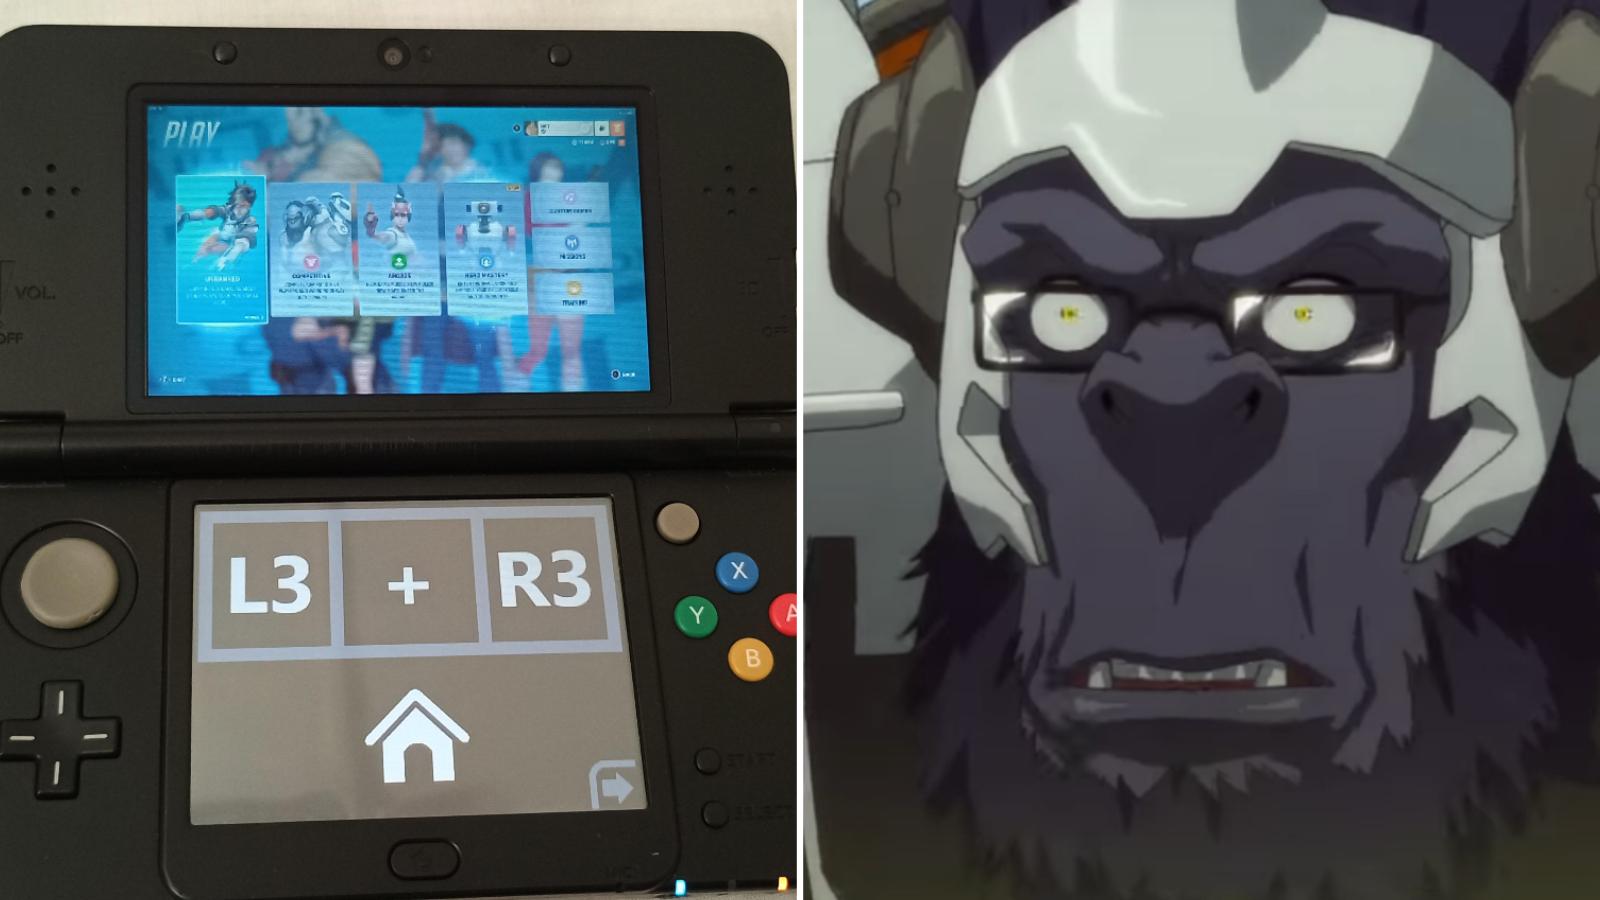 overwatch 2 running on nintendo 3ds with winston looking shocked